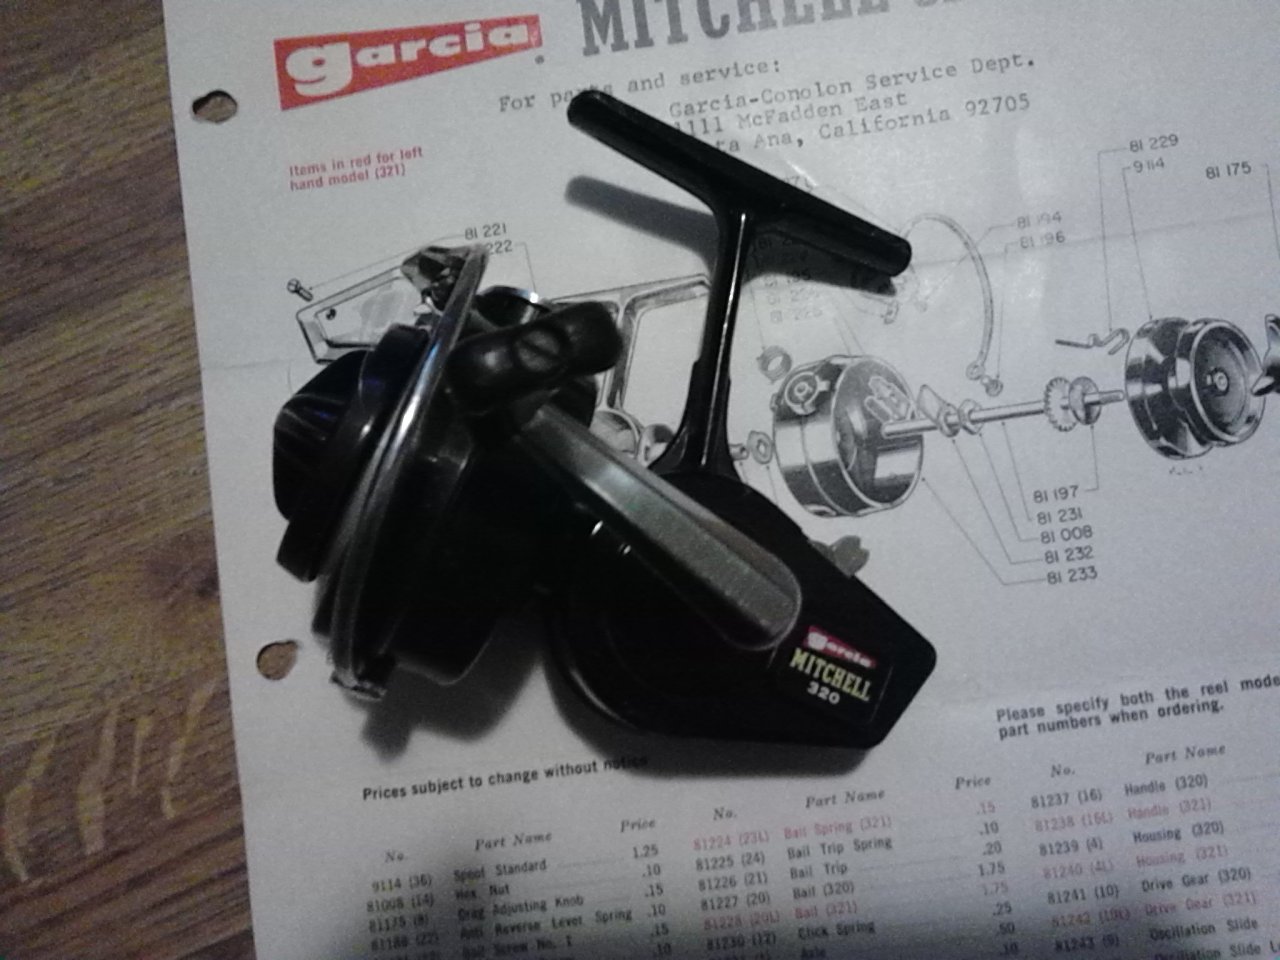 Garcia Mitchell Fishing Reels Accessories Tools Service Info Fold Out Brochure 